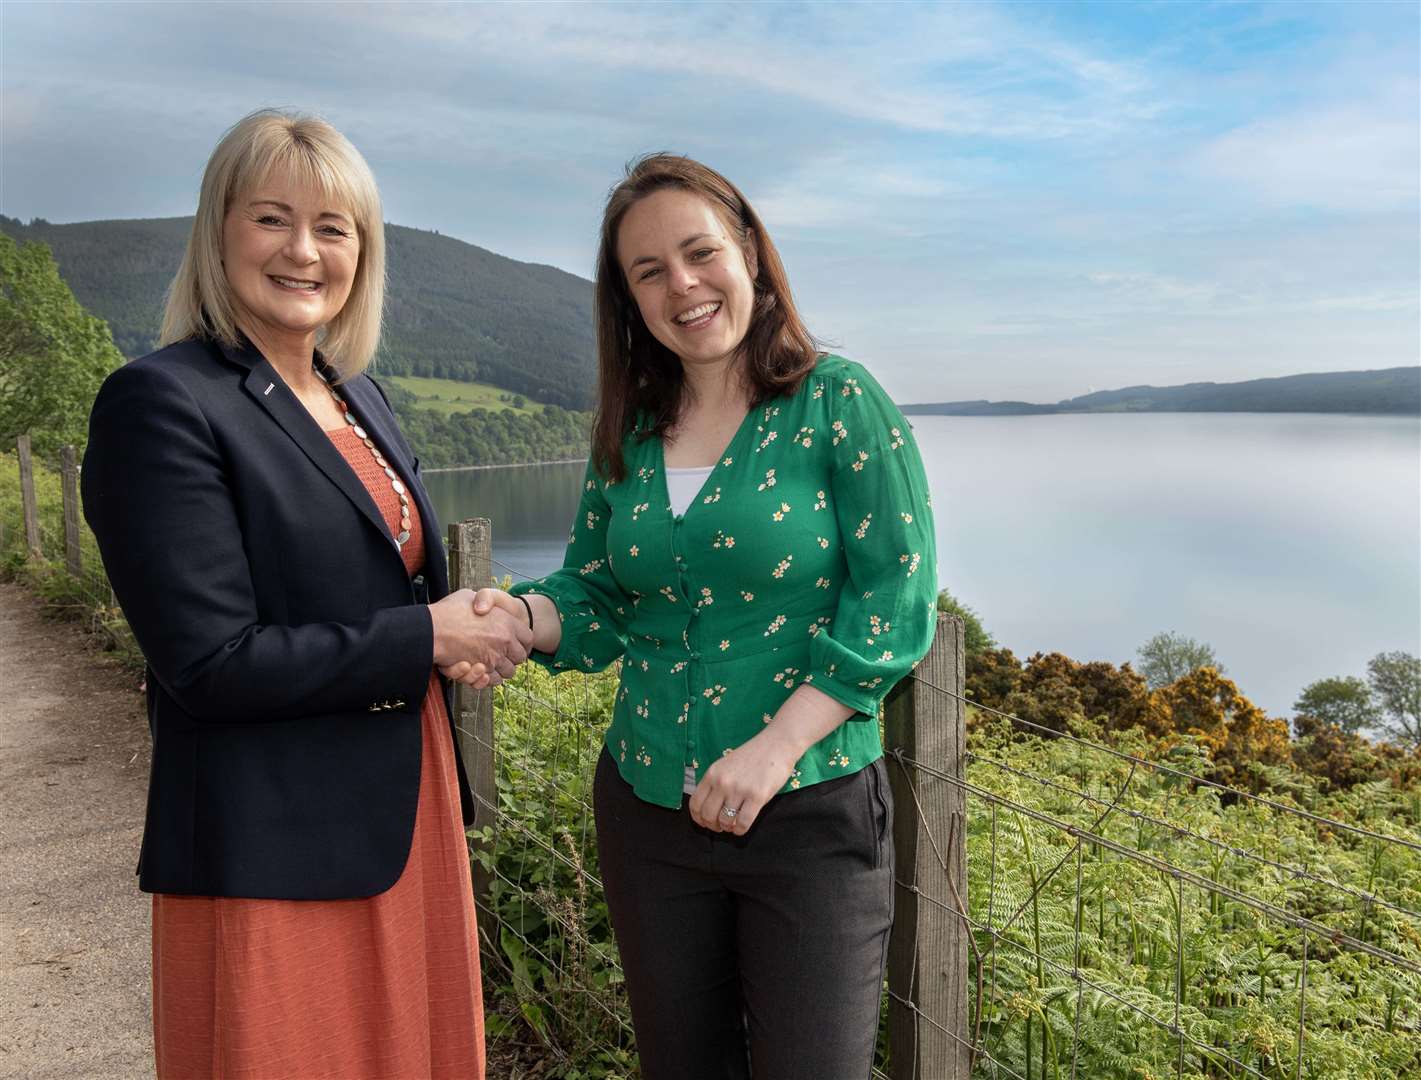 Kate Forbes MSP (right) with Yvonne Crook, chair of Highland Tourism Community Interest Company, at Loch Ness. Picture: Trevor Martin Photography.